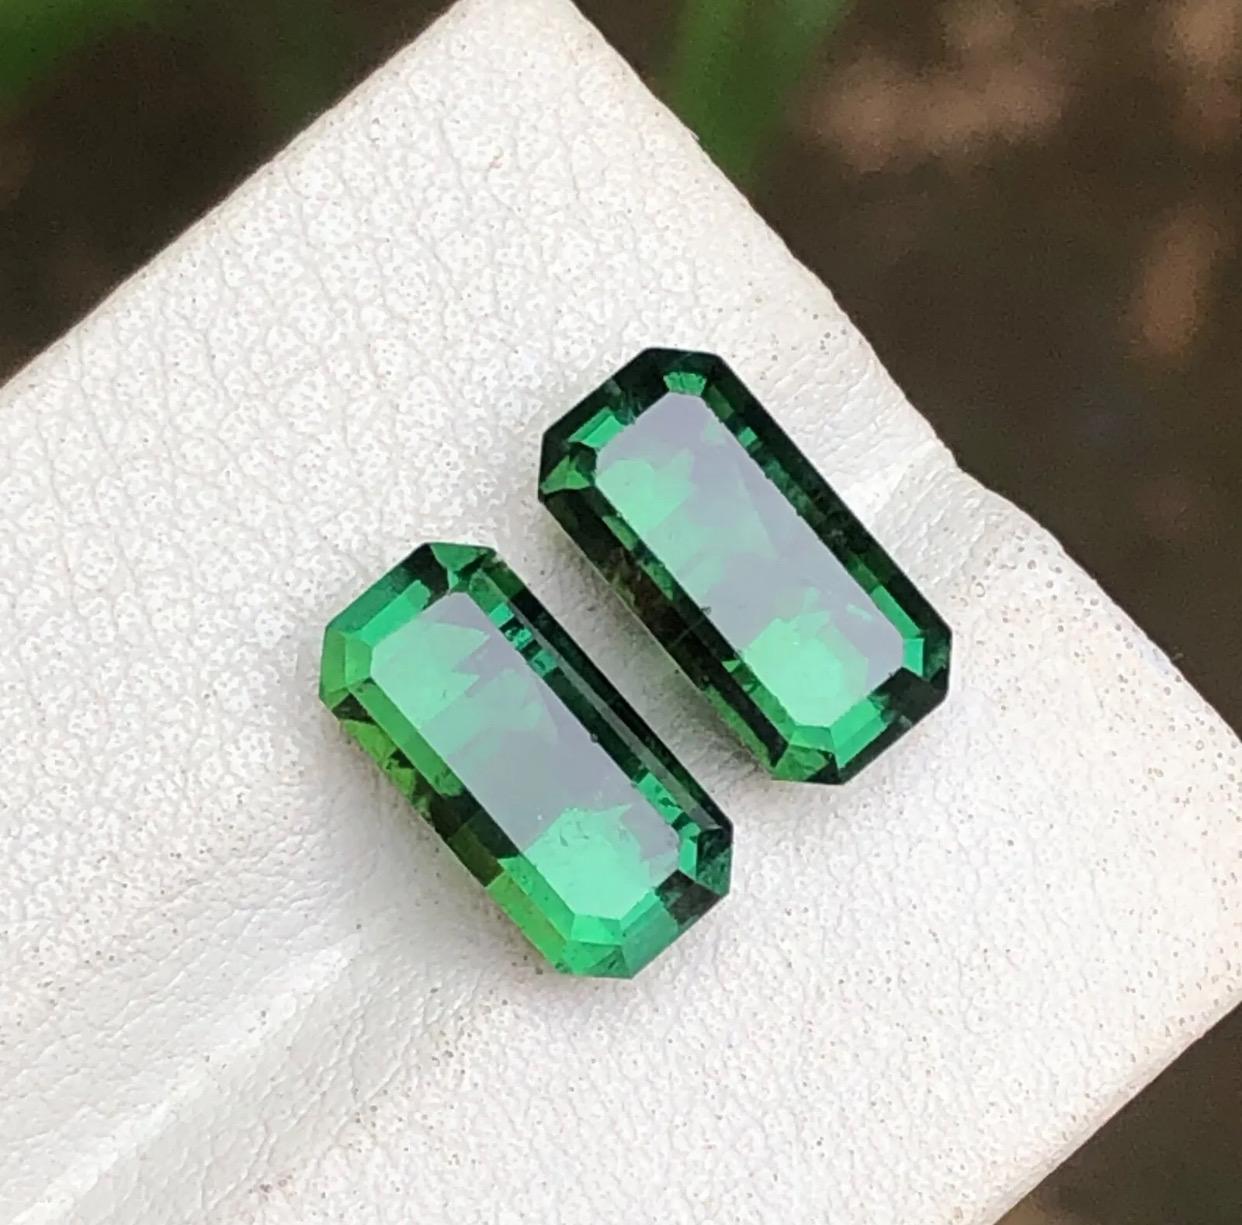 Contemporary Rare Green Natural Tourmaline Loose Gemstones, 7.20 Ct-Emerald Cut Afghanistan For Sale